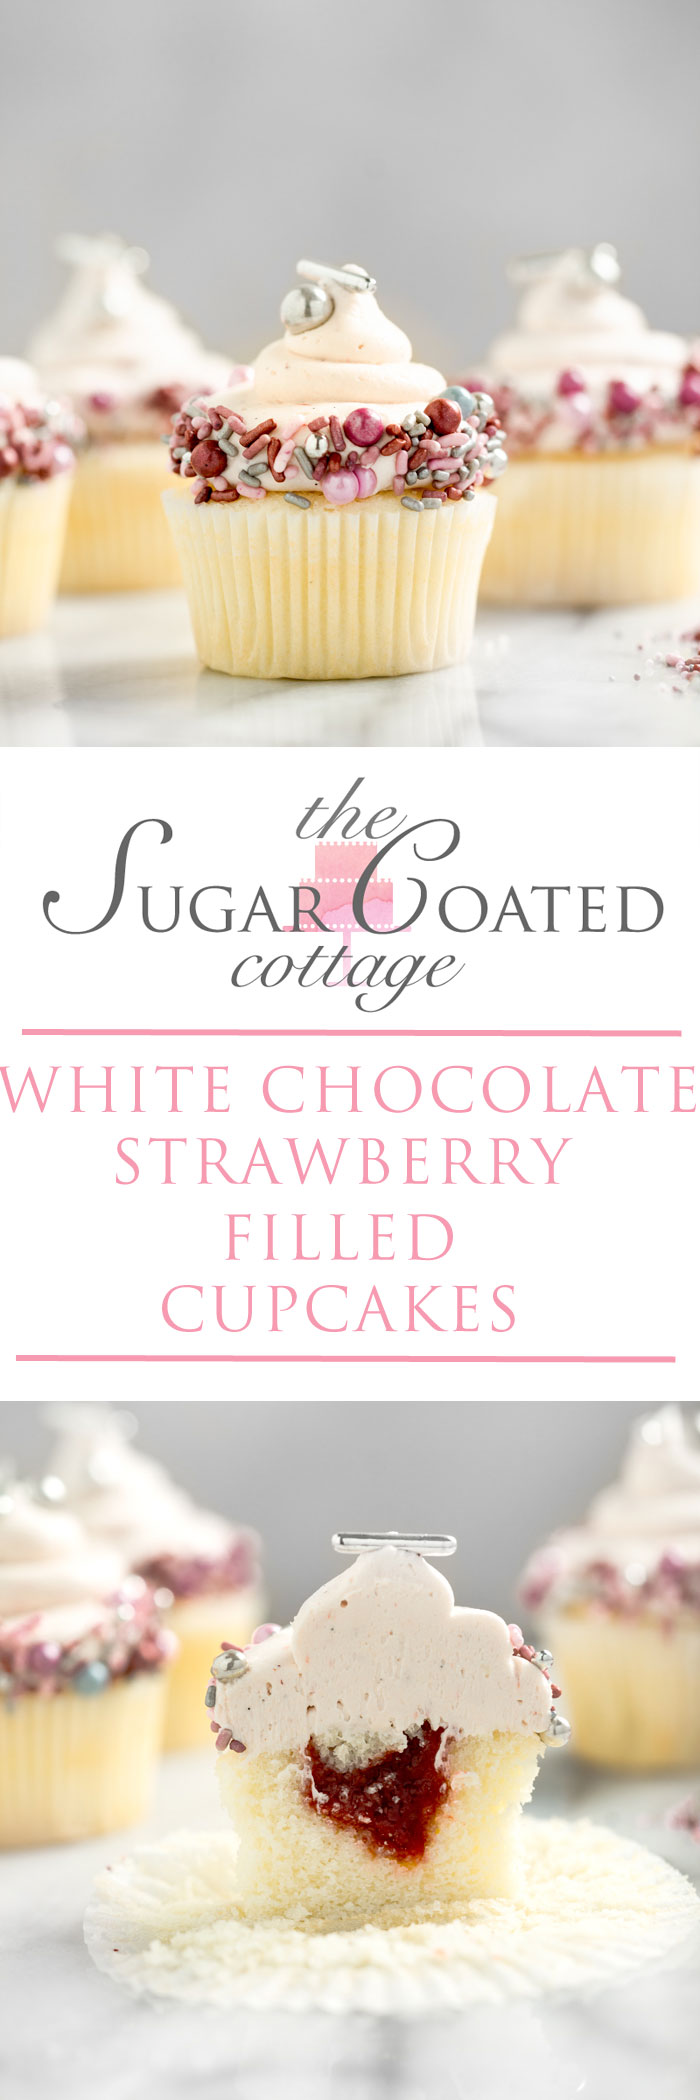 White Chocolate Strawberry filled cupcakes. White chocolate strawberry buttercream on top of a strawberry puree filled cupcake!! #cupcakes #buttercream | thesugarcoatedcottage.com